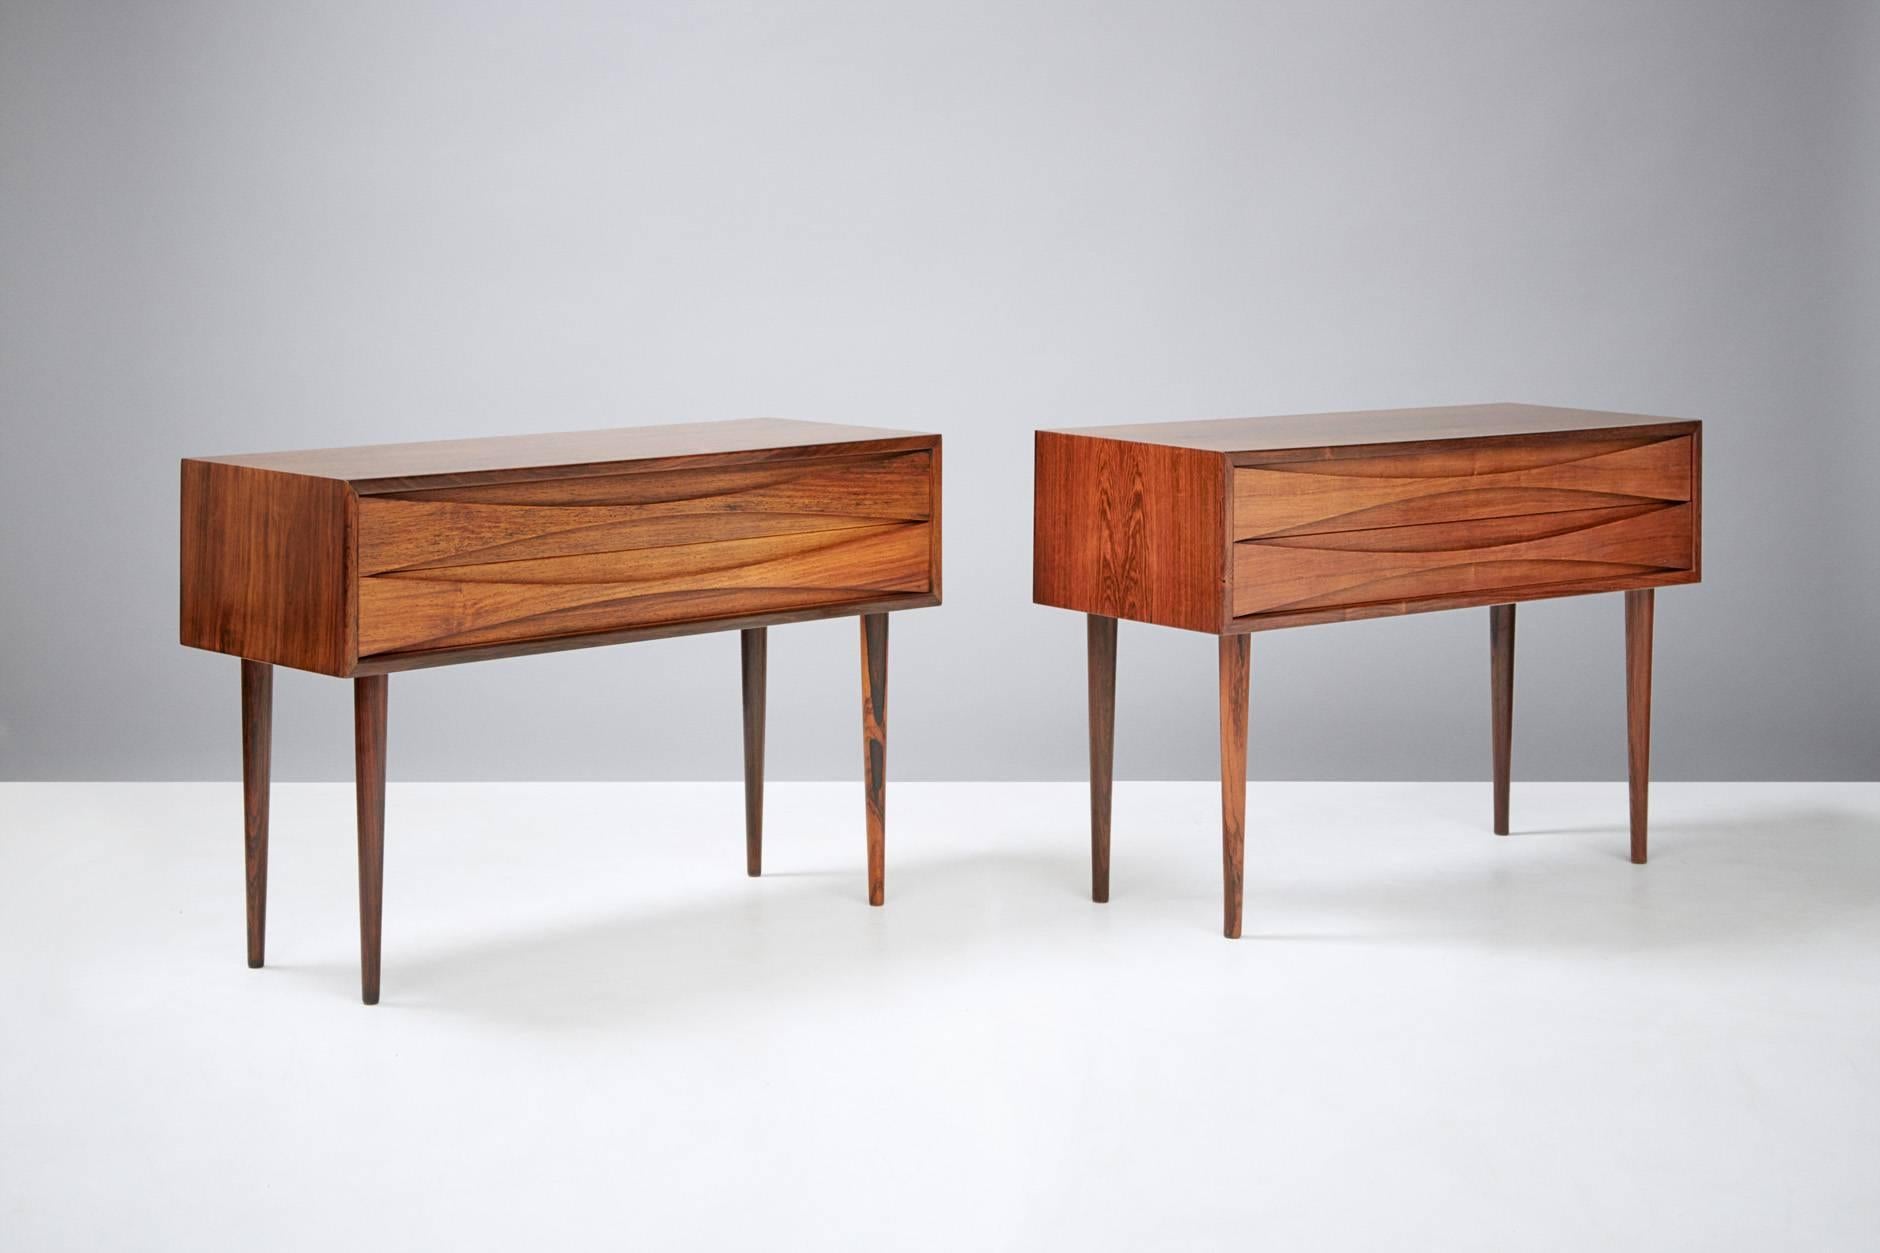 Pair of bedside cabinets, circa 1960

Rosewood cabinets by Niels Clausen for NC Møbler, Odense, Denmark. Produced, circa 1960. Two drawers with scalloped pulls and solid tapered legs.